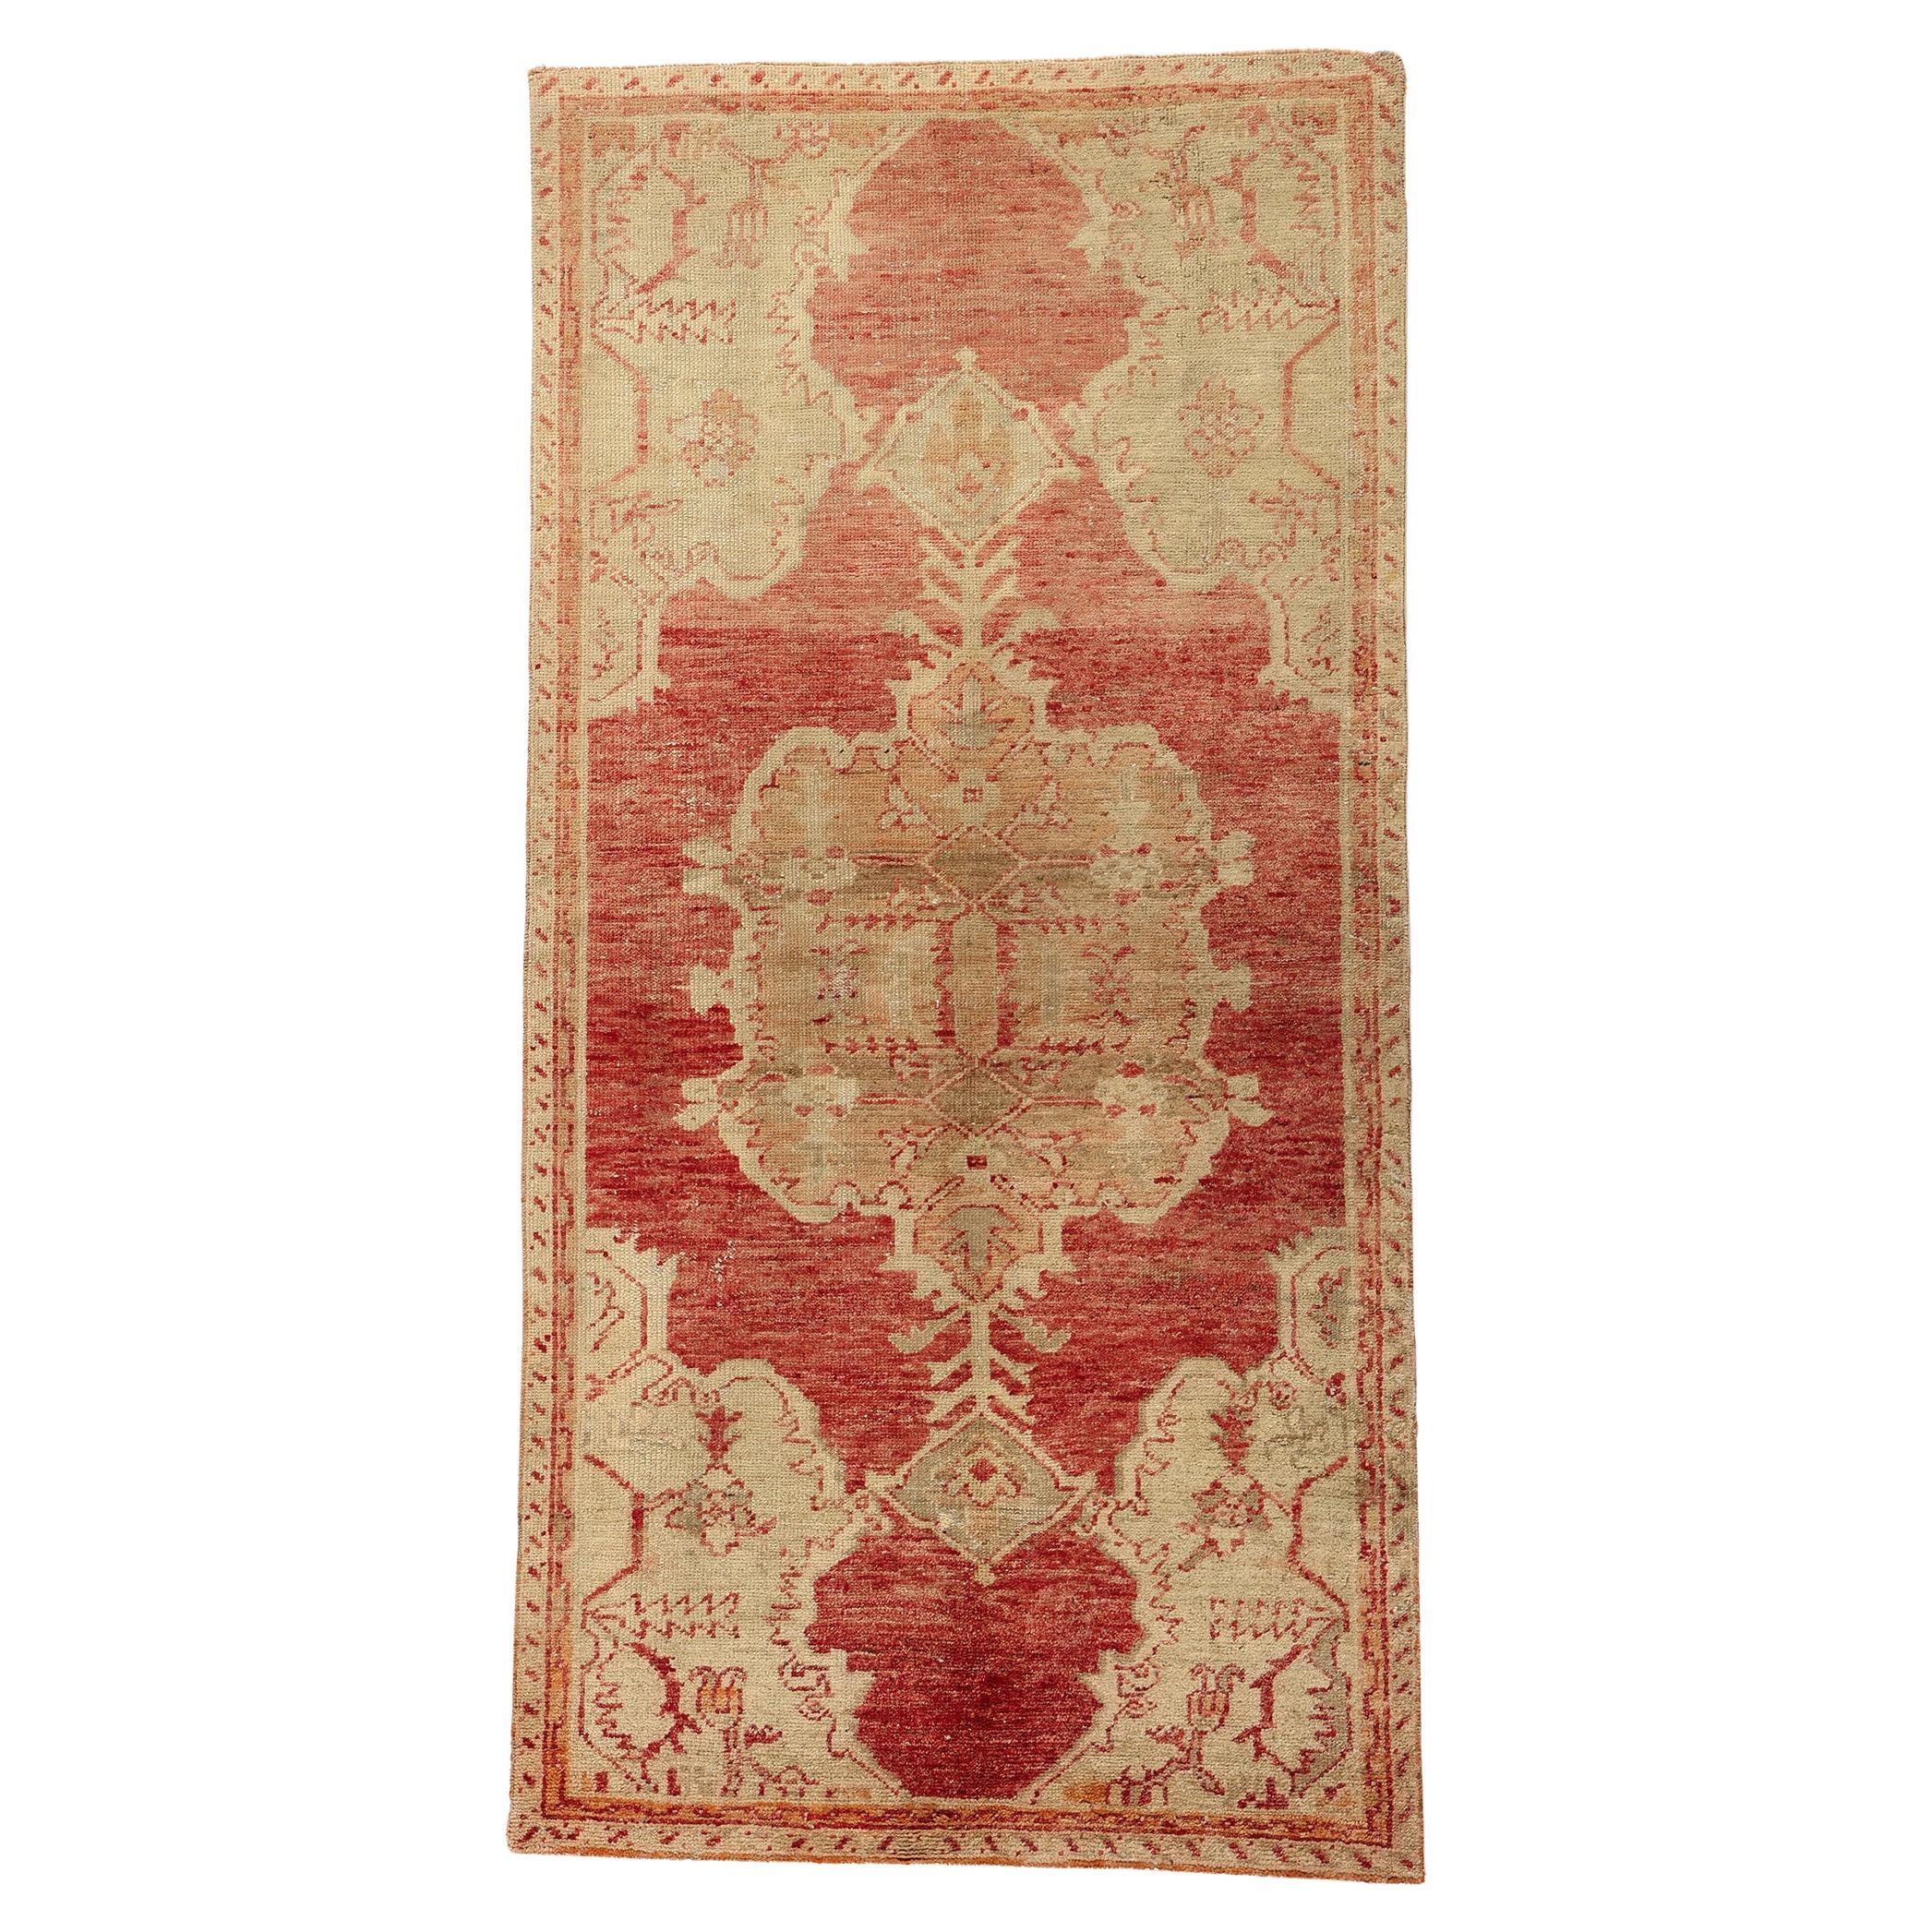 Vintage Turkish Oushak Rug with Rustic Earth-Tone Colors